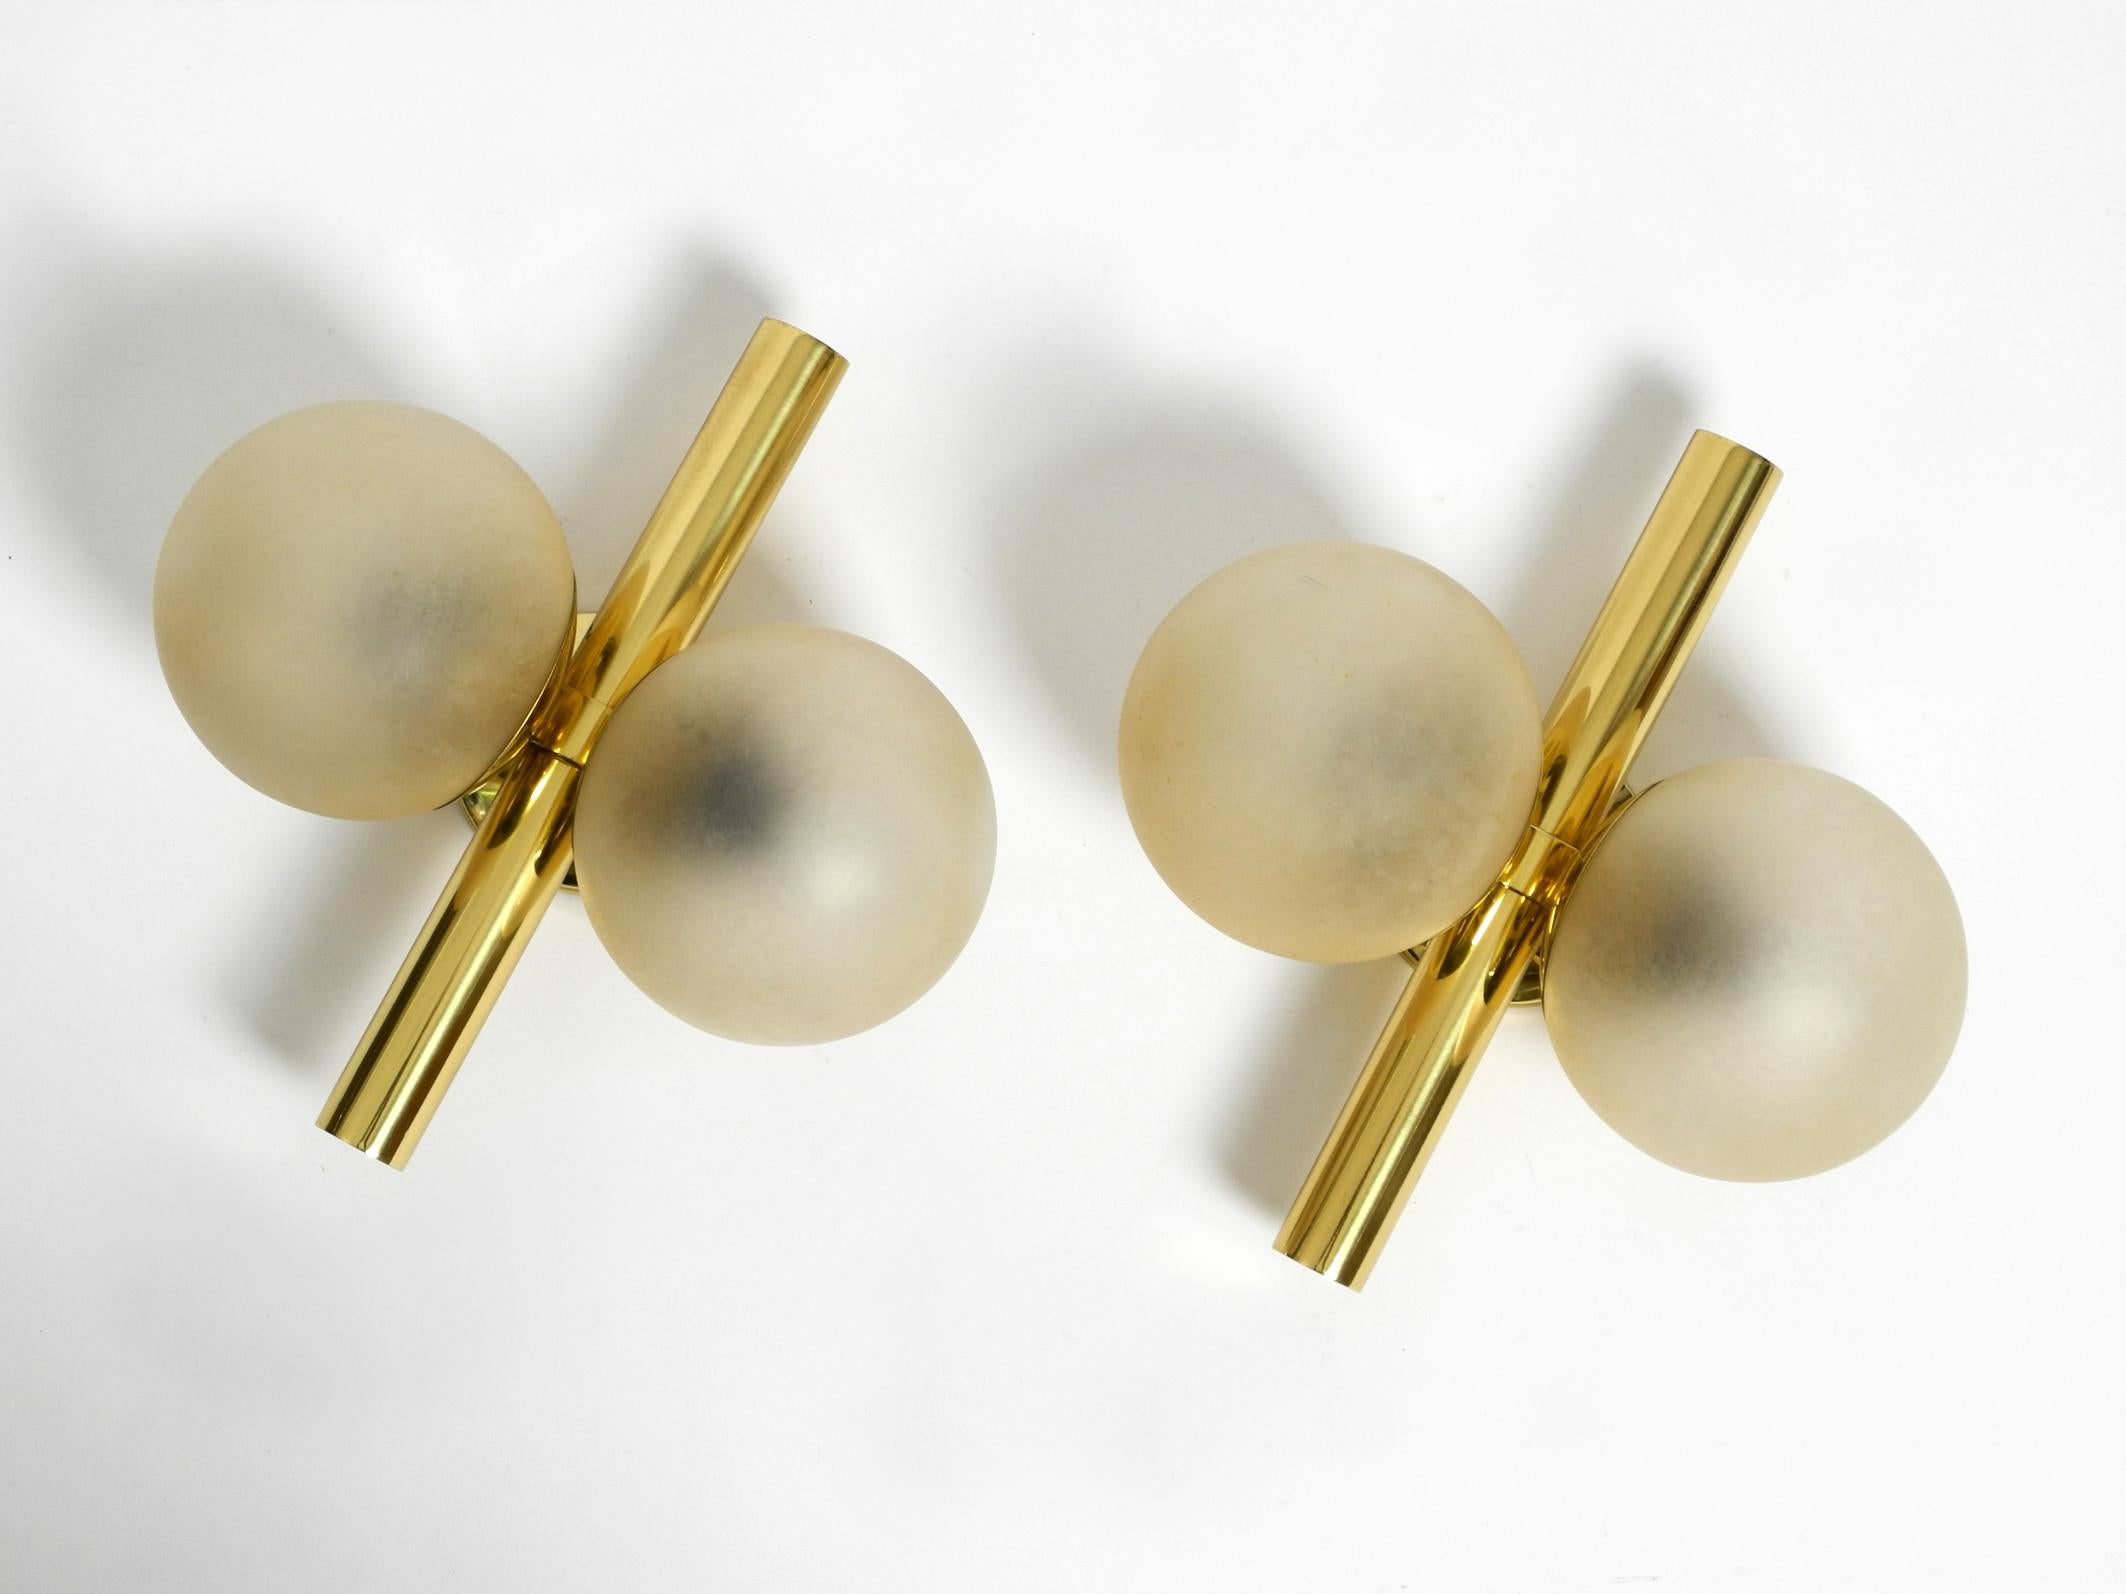 A pair of rare, beautiful Kaiser brass wall lamps with two gold-colored glass spheres.
Super sixties space age design. Two E14 sockets each for max. 40W each for glare-free light.
The original pull switches are still on both lamps.
Very good